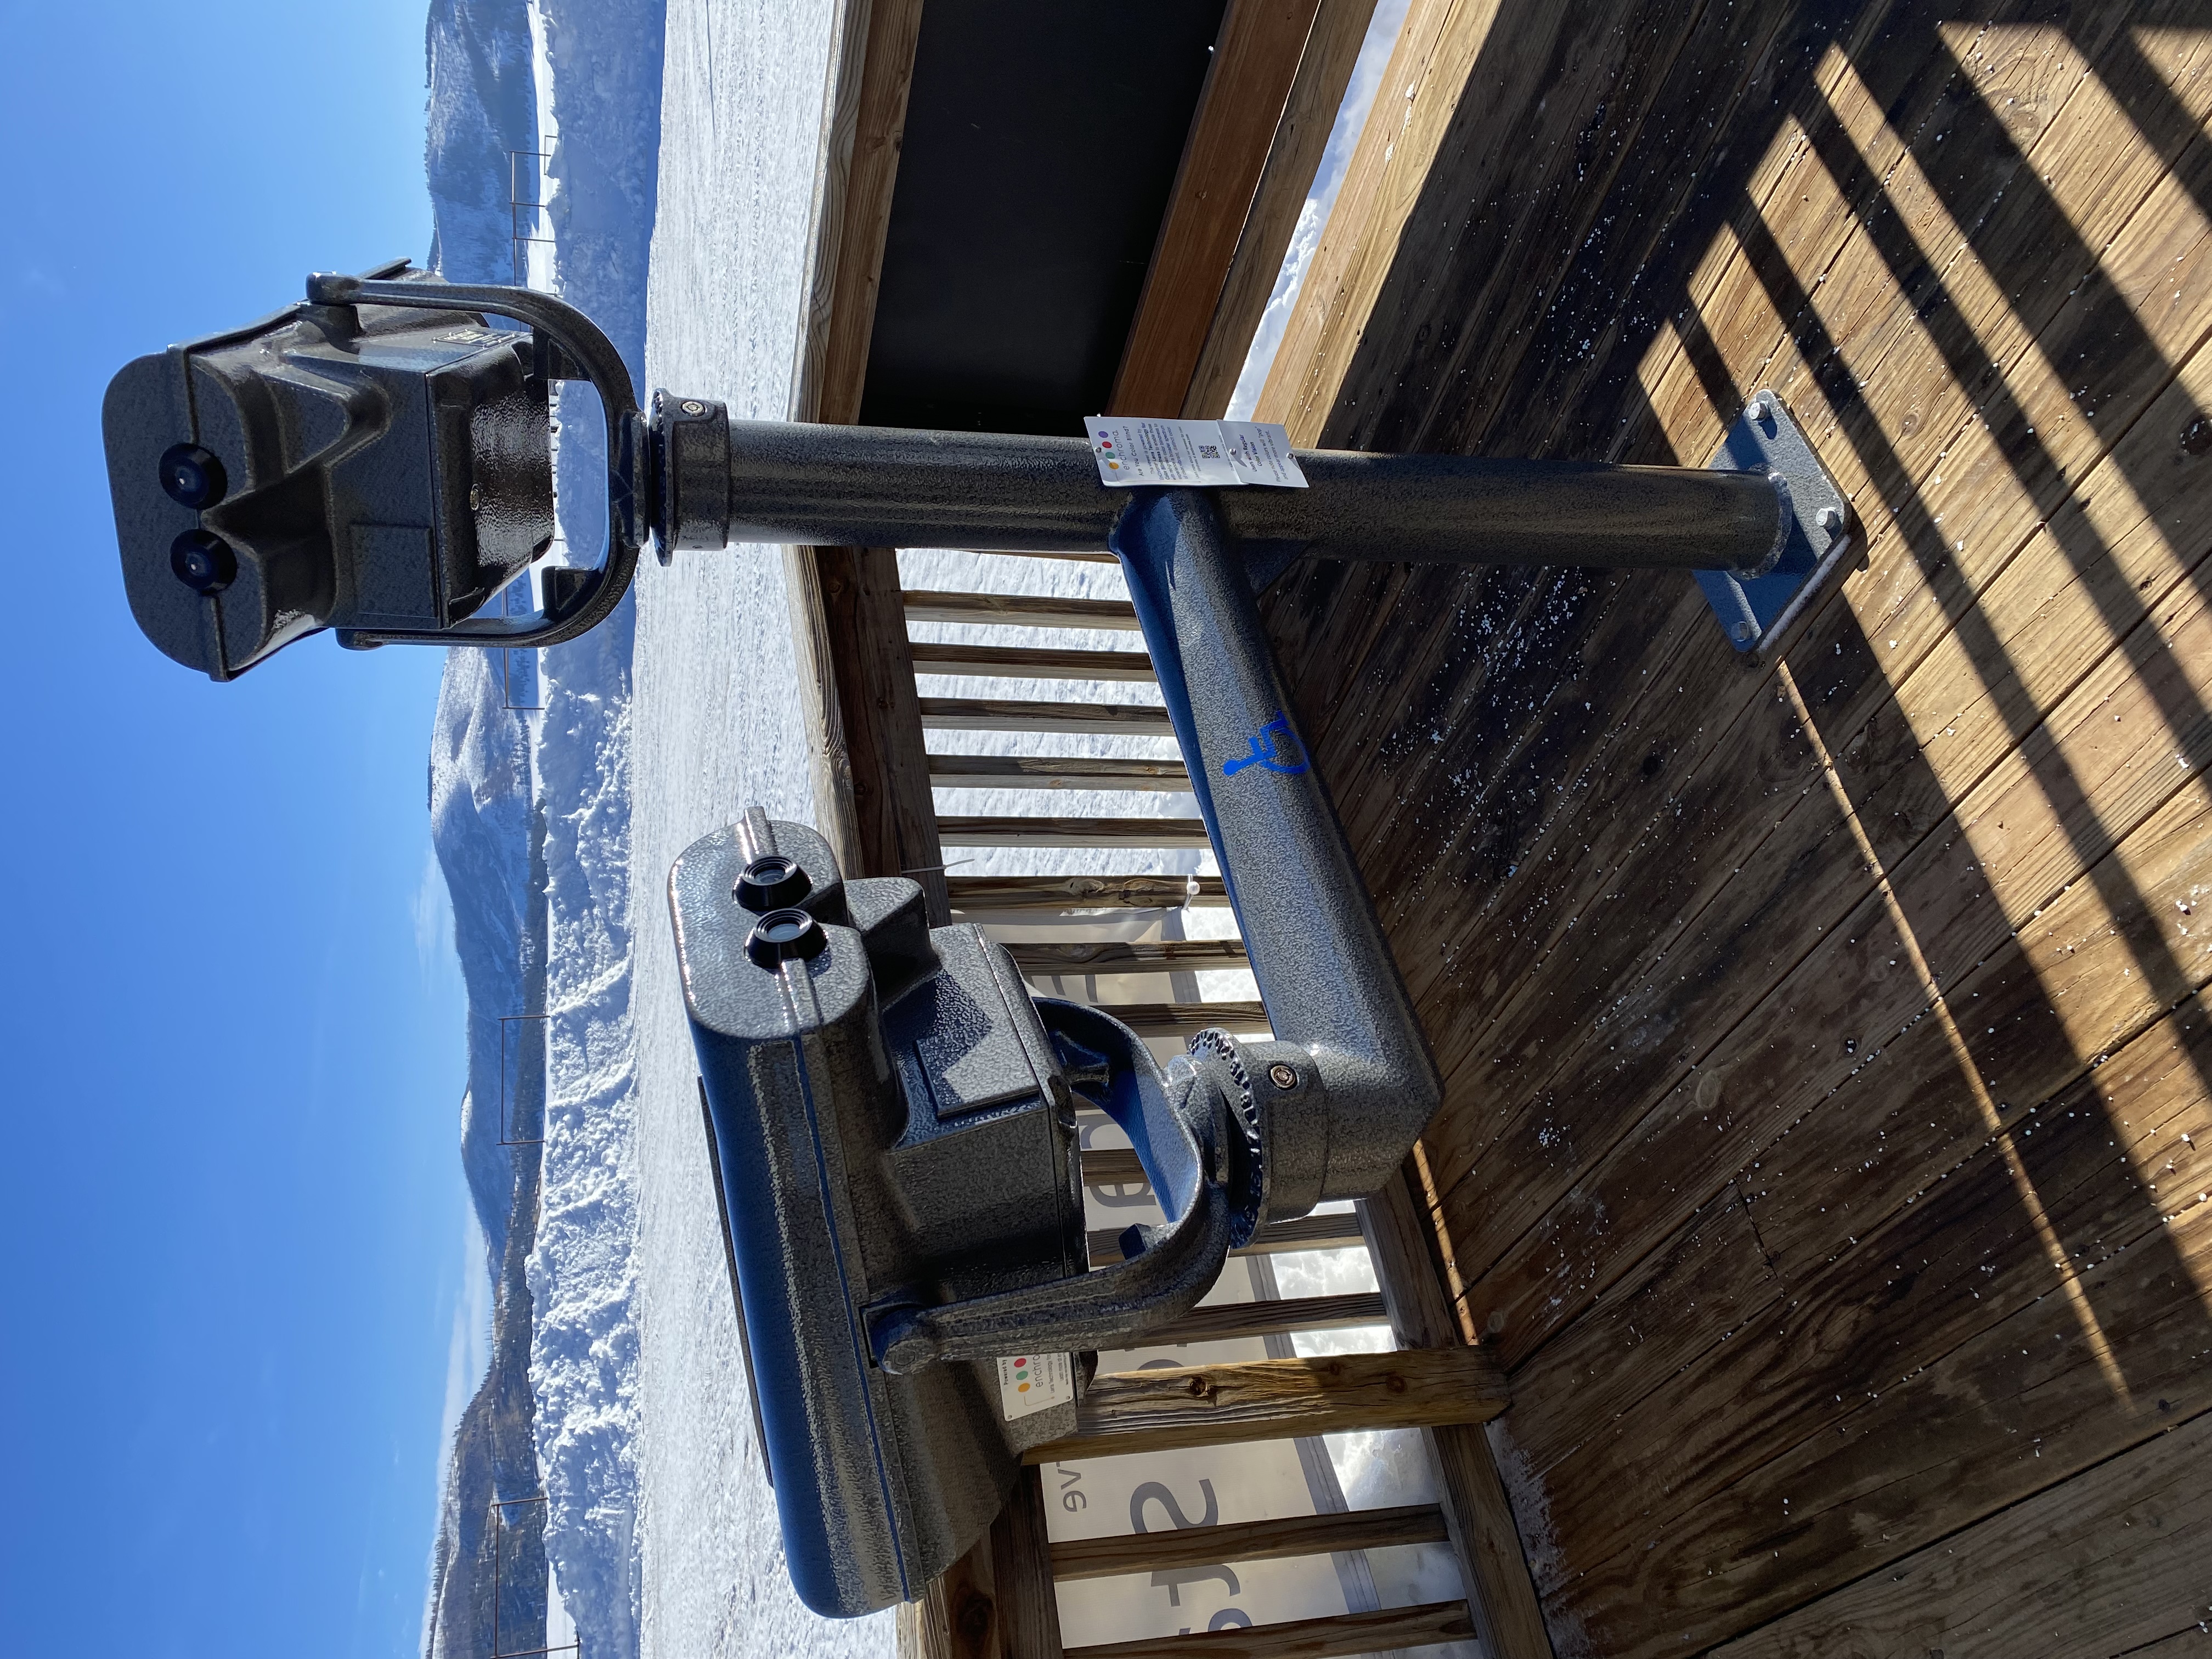 Two spotting scopes, one of which is labeled wheelchair accessible, are fastened into a wooden porch in a snowy landscape.